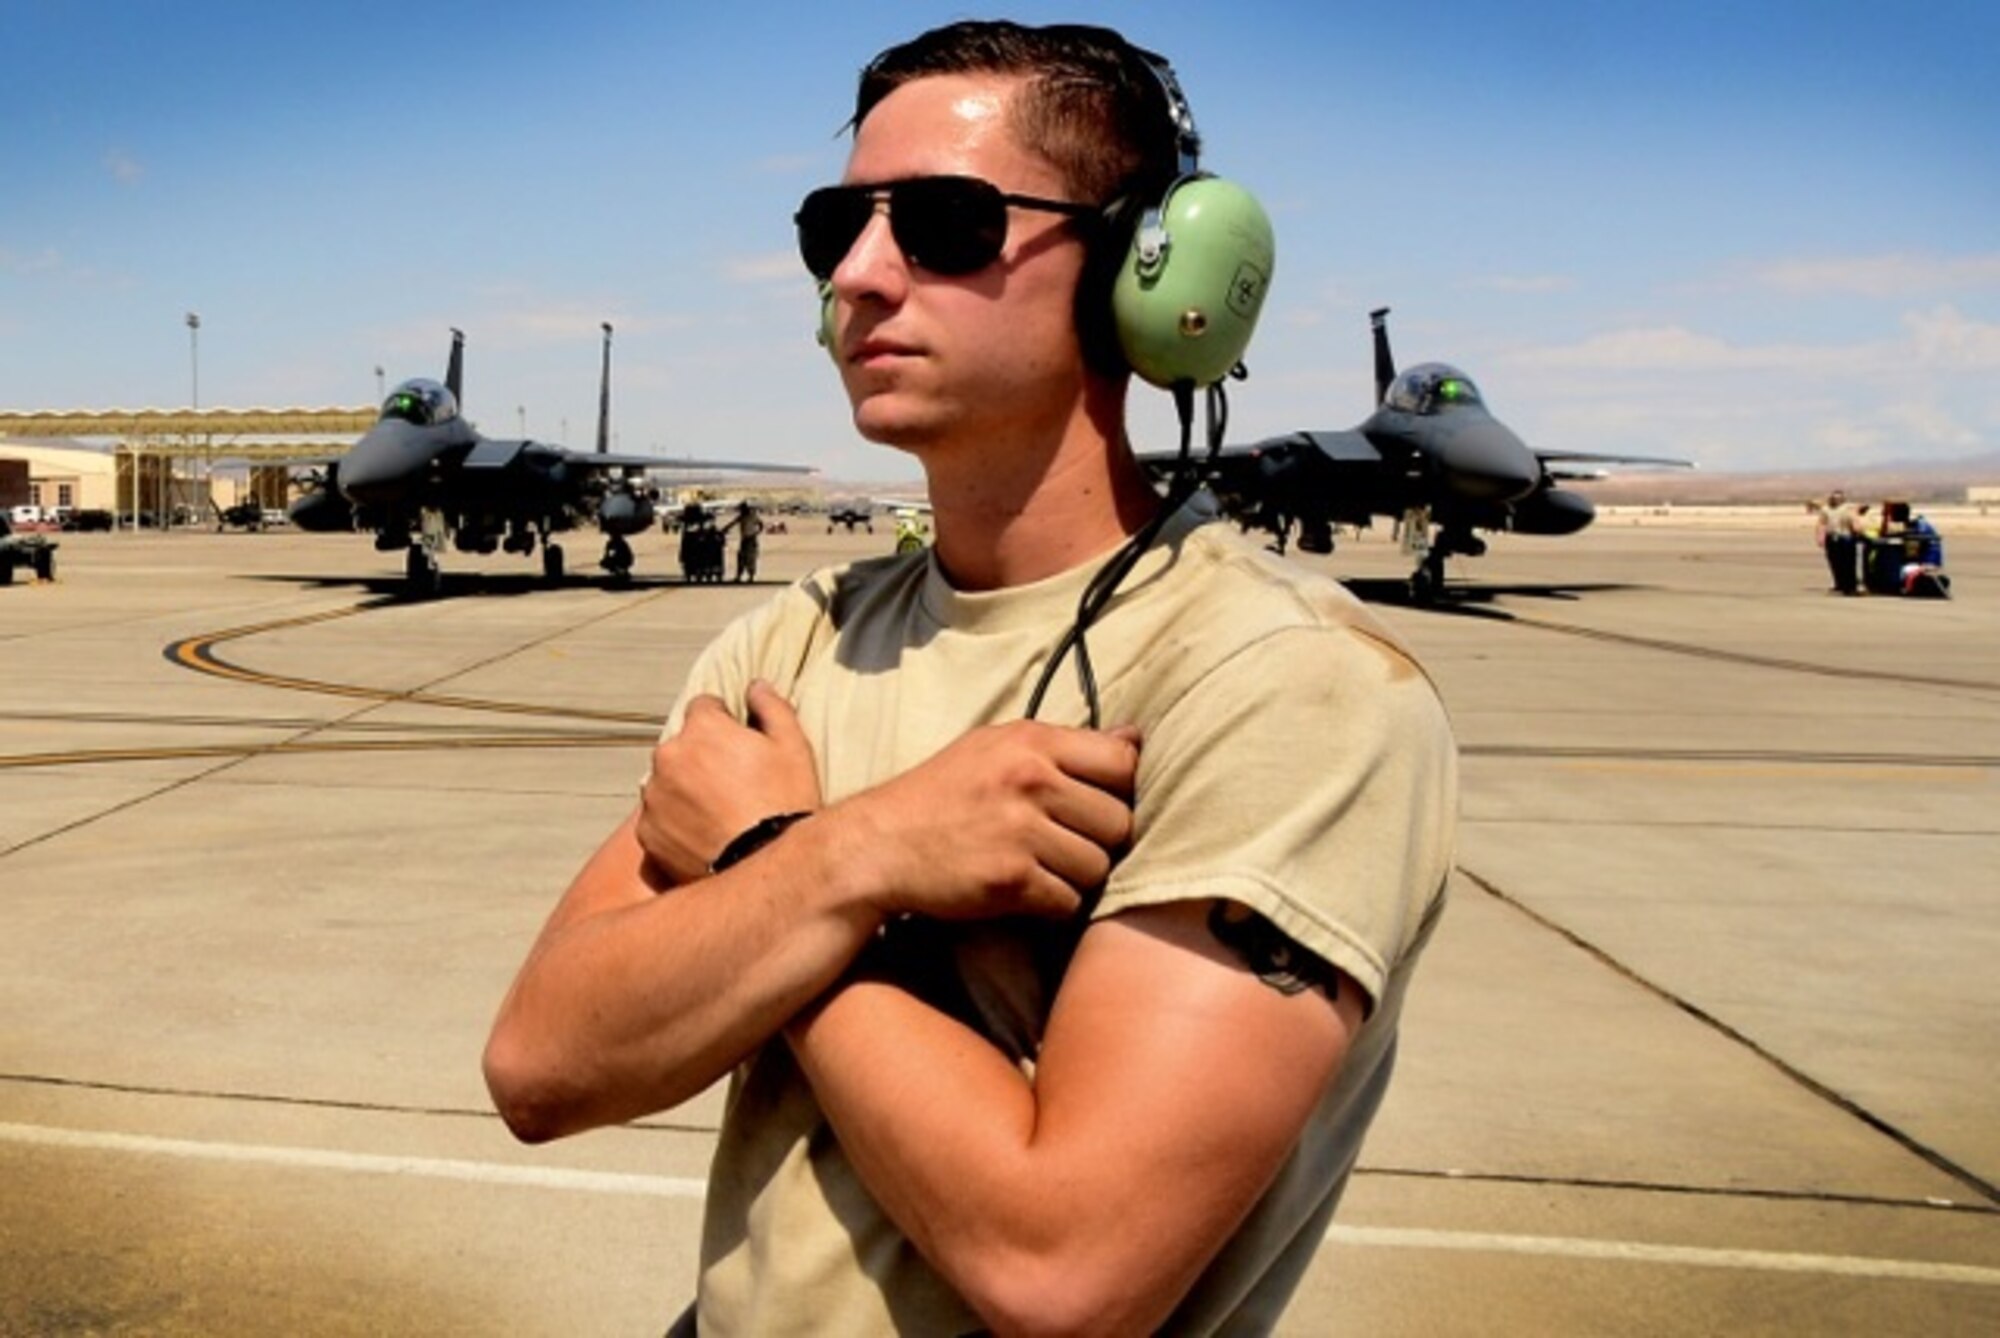 U.S. Air Force Staff Sgt. Gabriel Roth, 48th Aircraft Maintenance Squadron dedicated crew chief prepares to marshal out an F-15E Strike Eagle in support of Red Flag 16-4 at Nellis Air Force Base, Nevada Aug 22. Red Flag is the U.S. Air Force’s premier air-to-air combat training exercise and one of a series of advanced training programs that is administered by the U.S. Air Force Warfare Center and executed through the 414th Combat Training Squadron. (U.S. Air Force photo/ Tech. Sgt. Matthew Plew)